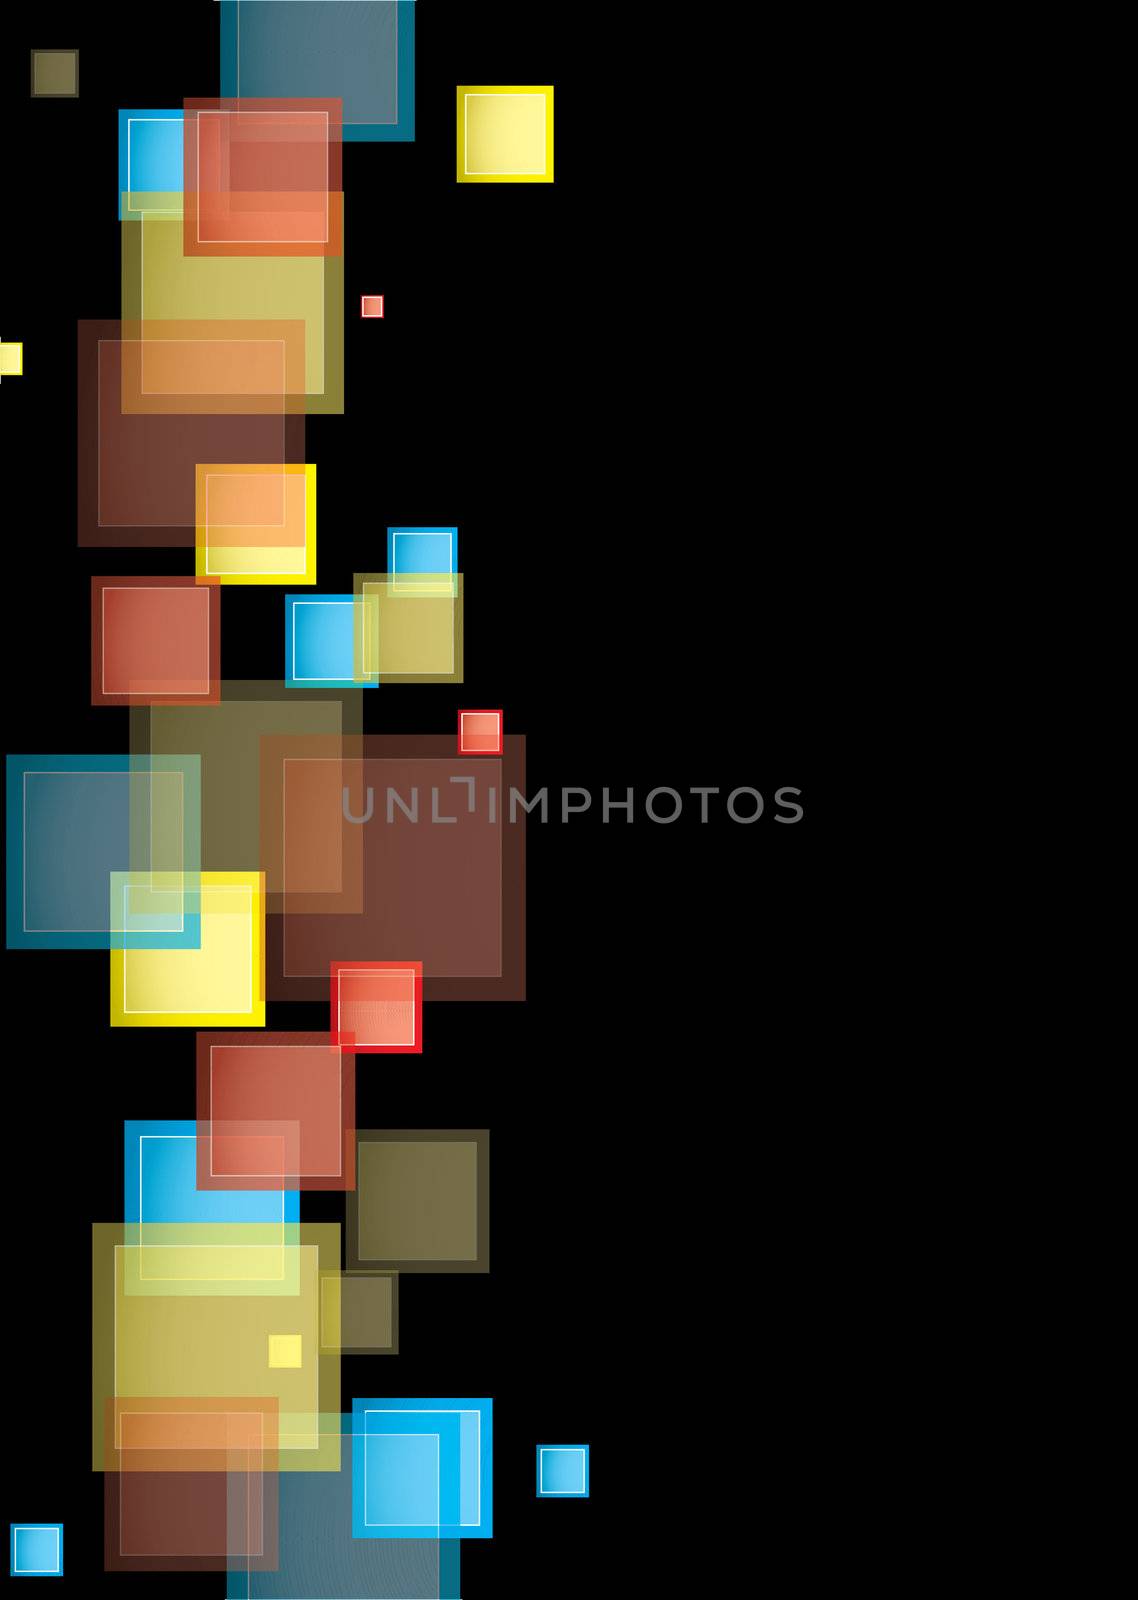 Black background presentation template with rainbow abstract squares